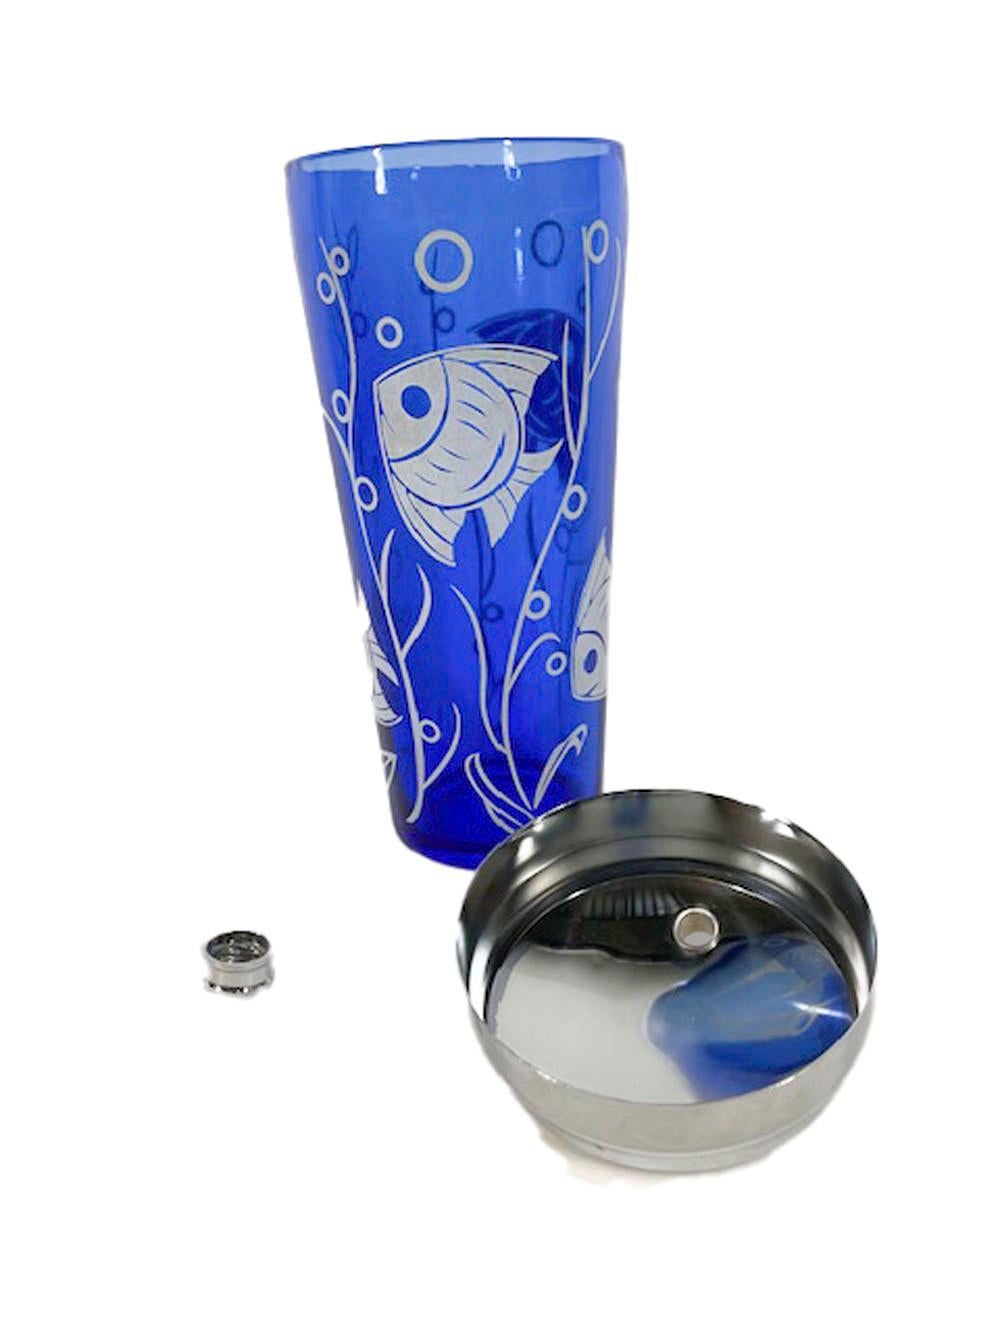 Art Deco cocktail shaker from the Hazel-Atlas Sportsman Series with a tropical fish motif in white on cobalt blue glass and having a chrome lid.